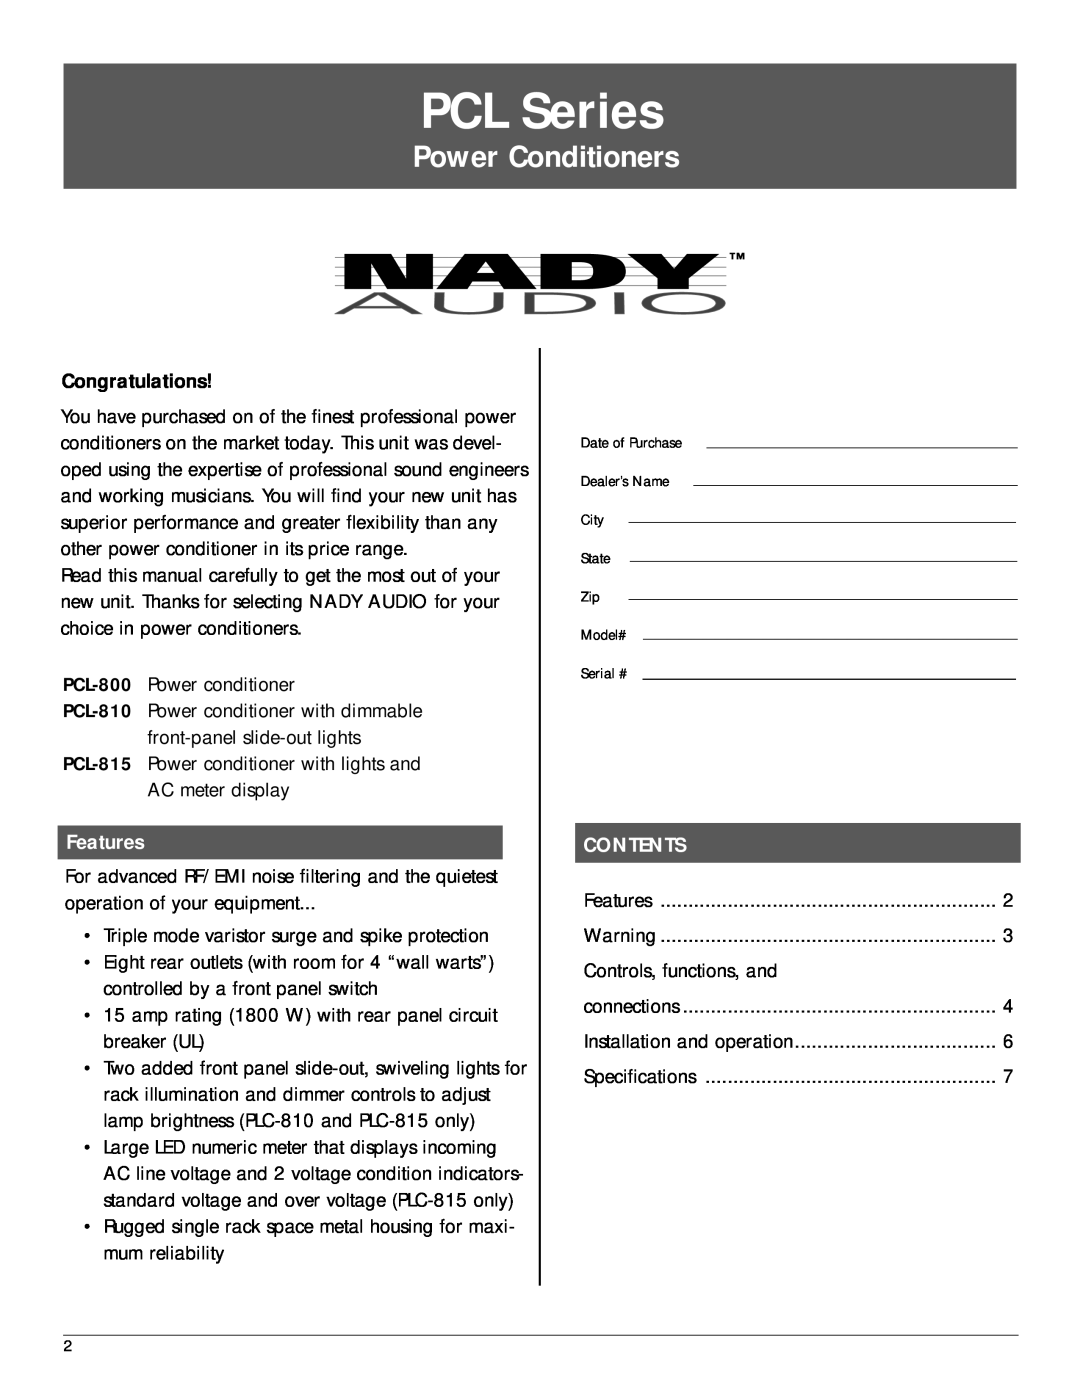 Nady Systems PCL815 manual PCL Series, Power Conditioners, Congratulations, Features, Contents 